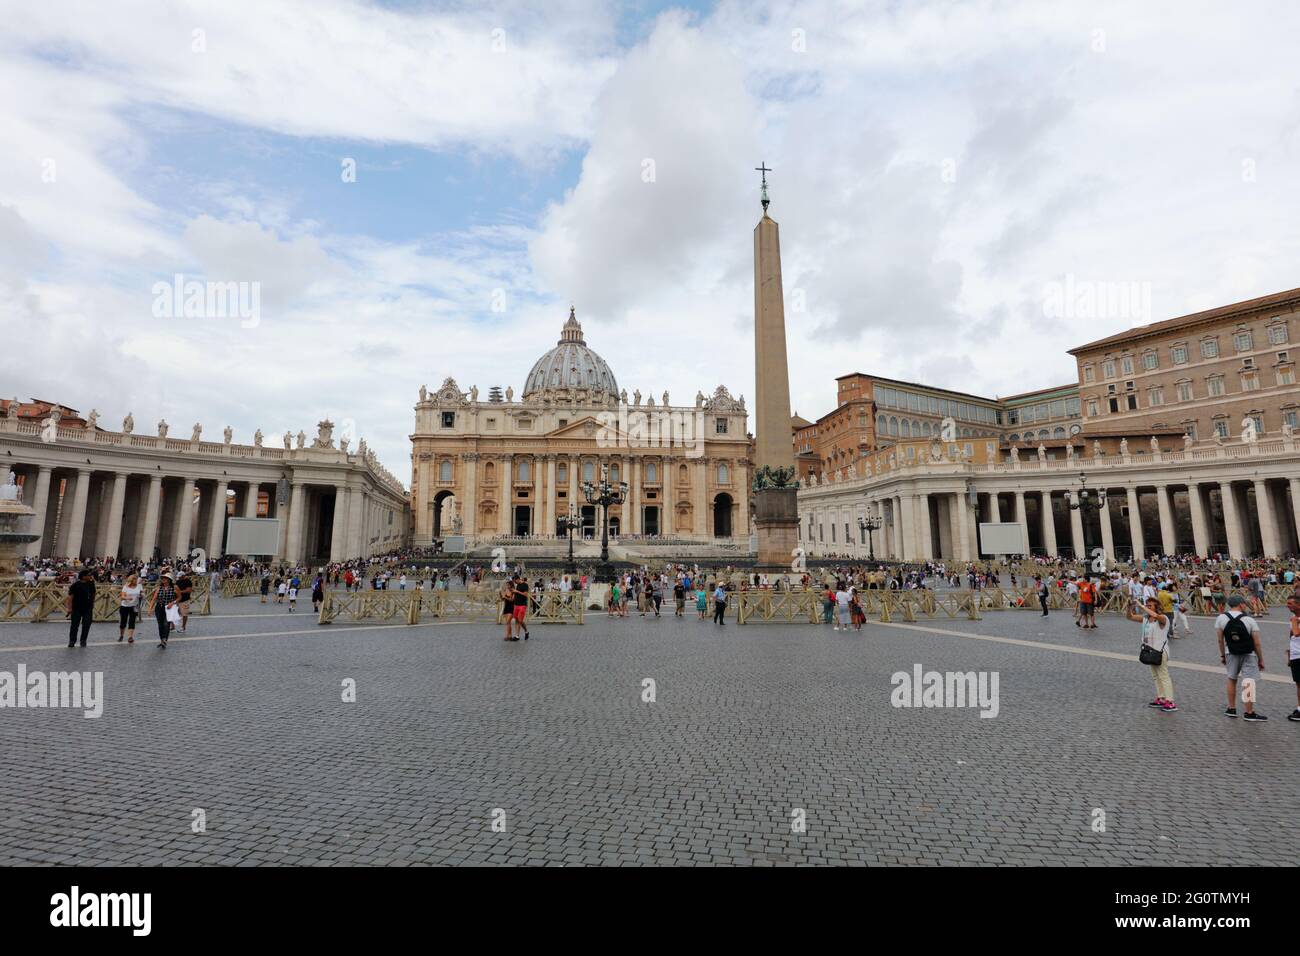 People on St. Peter's square in Vatican against St. Peter basilica, the most renowned work of Renaissance architecture and largest church in the world Stock Photo